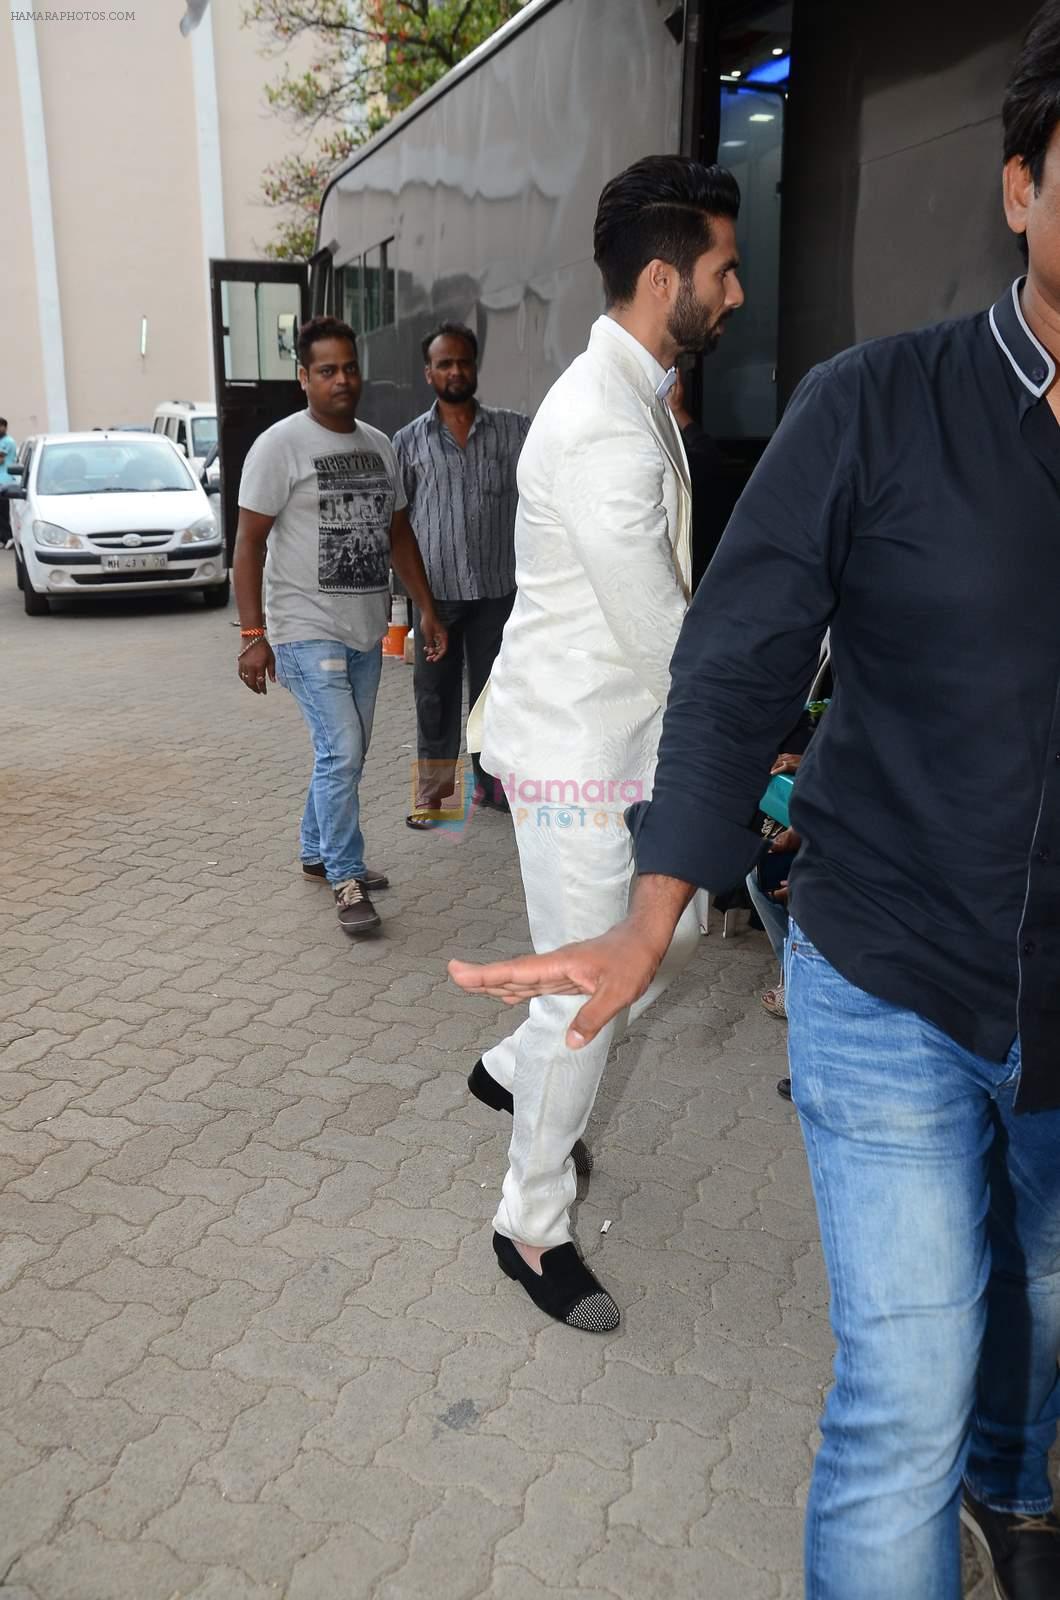 Shahid Kapoor snapped at mehboob on 29th June 2015